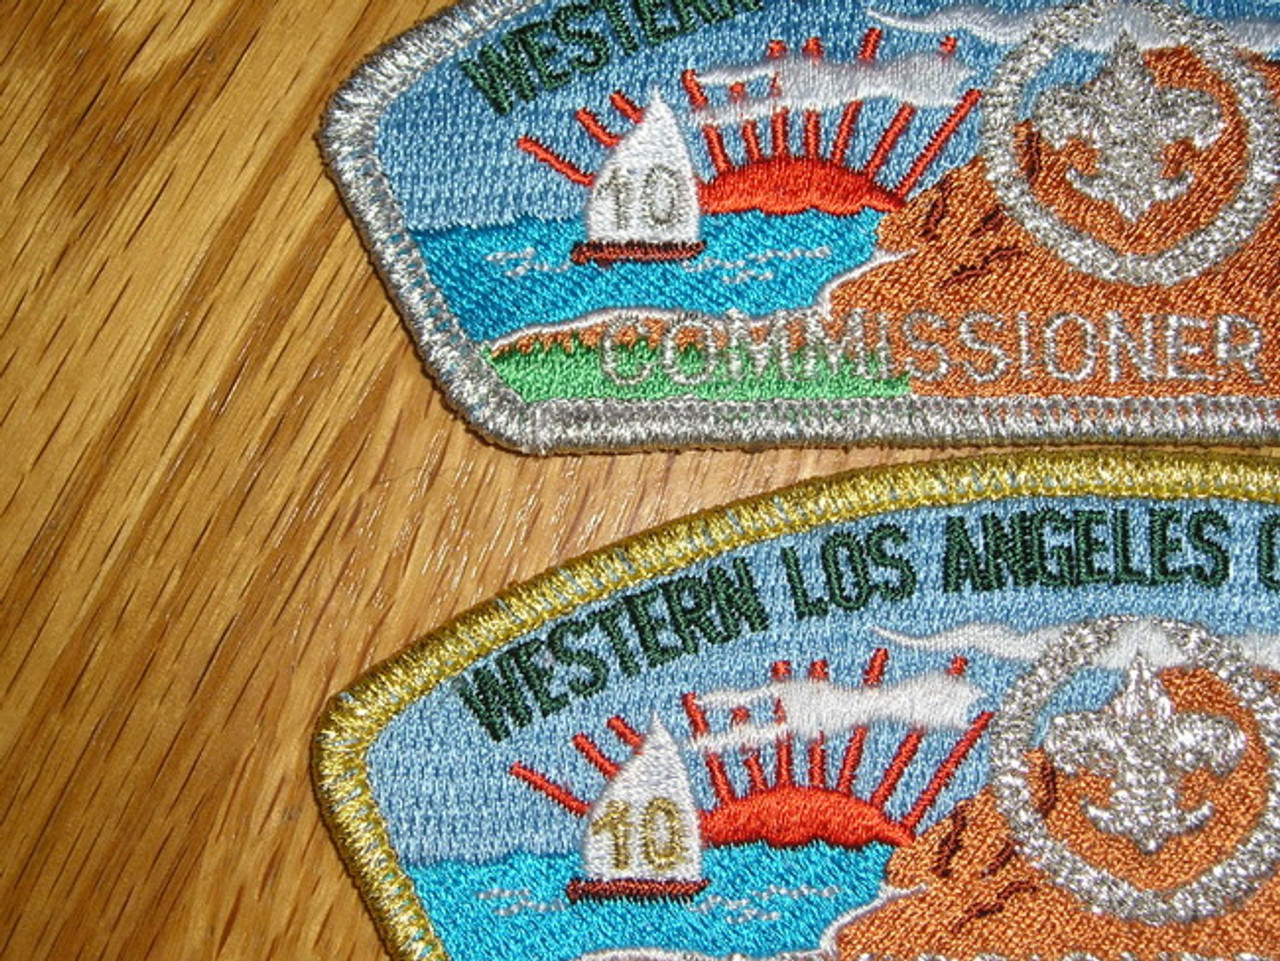 Western Los Angeles County Council sa30/sa31 CSP - Commissioner Service given to Board Members, individually numbered, 15 sets made, offered at 50% of low book value